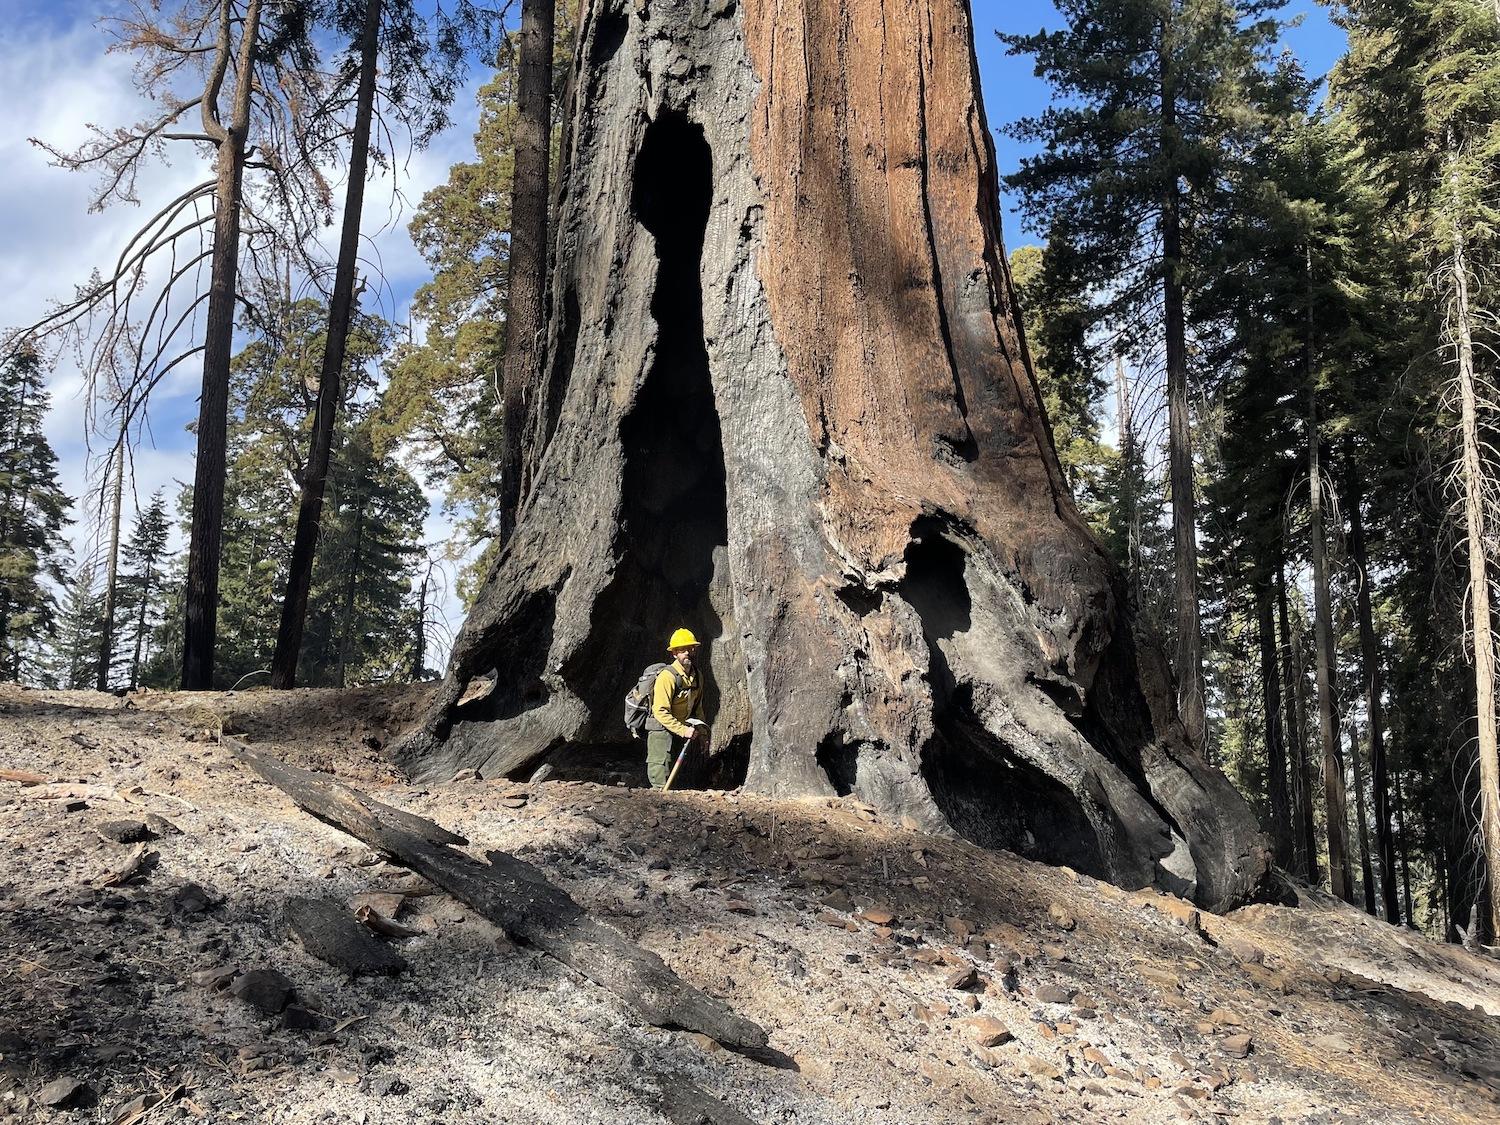 Hundreds of giant sequoia trees were burned by the KNP wildfire complex that roared through Kings Canyon and Sequoia national parks in 2021/NPS file, Joe Suarez